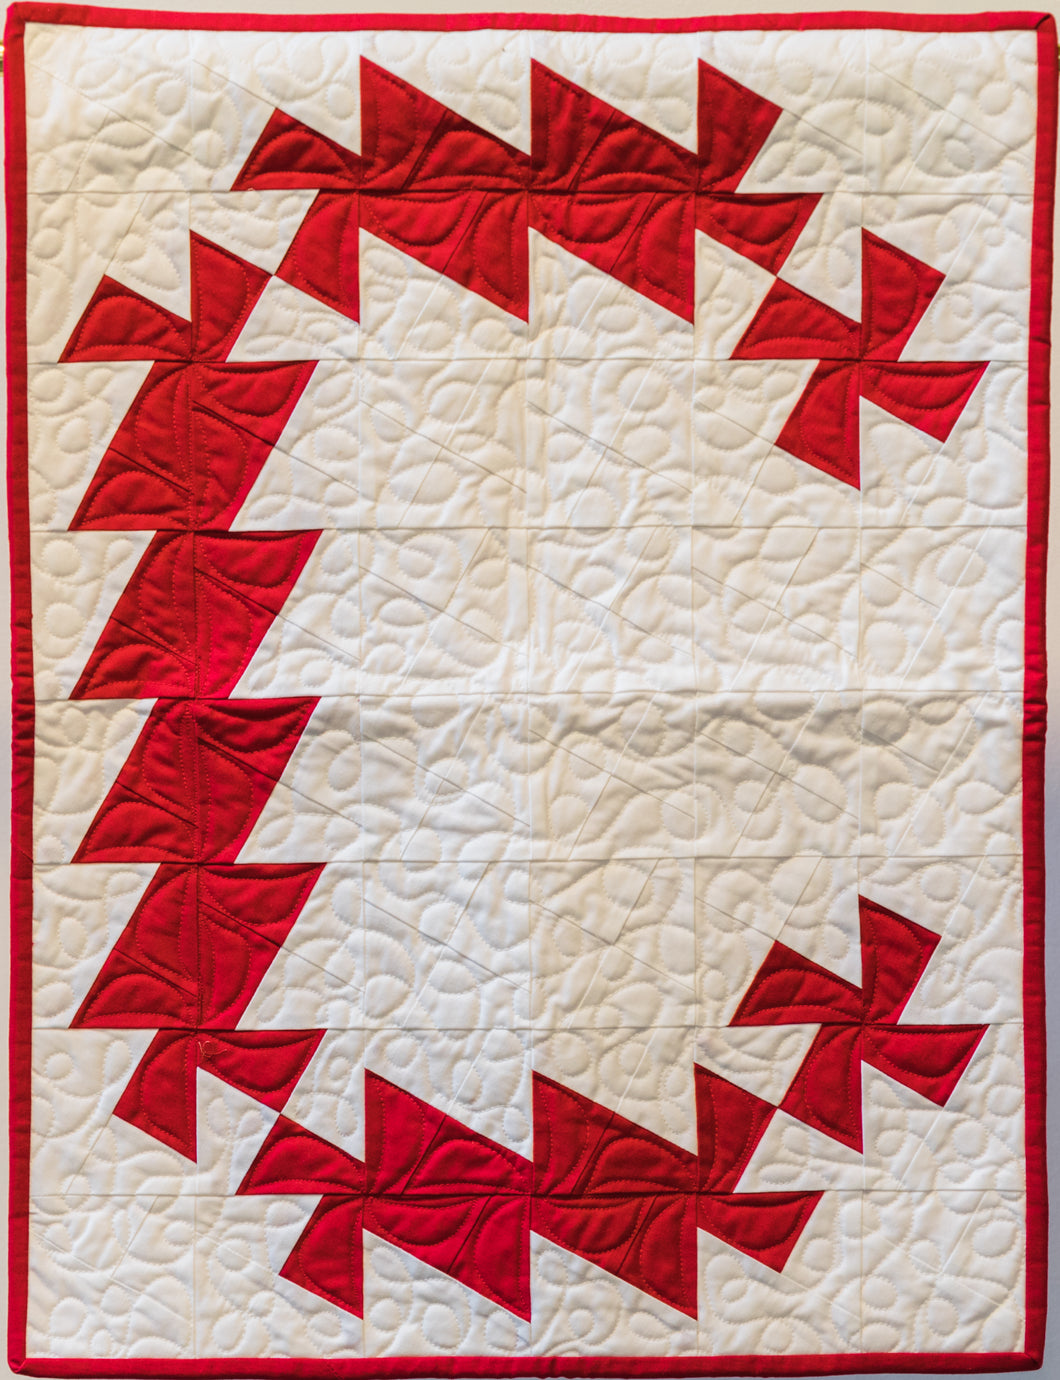 Quilt #08 - C is for Cornell and So Much More!